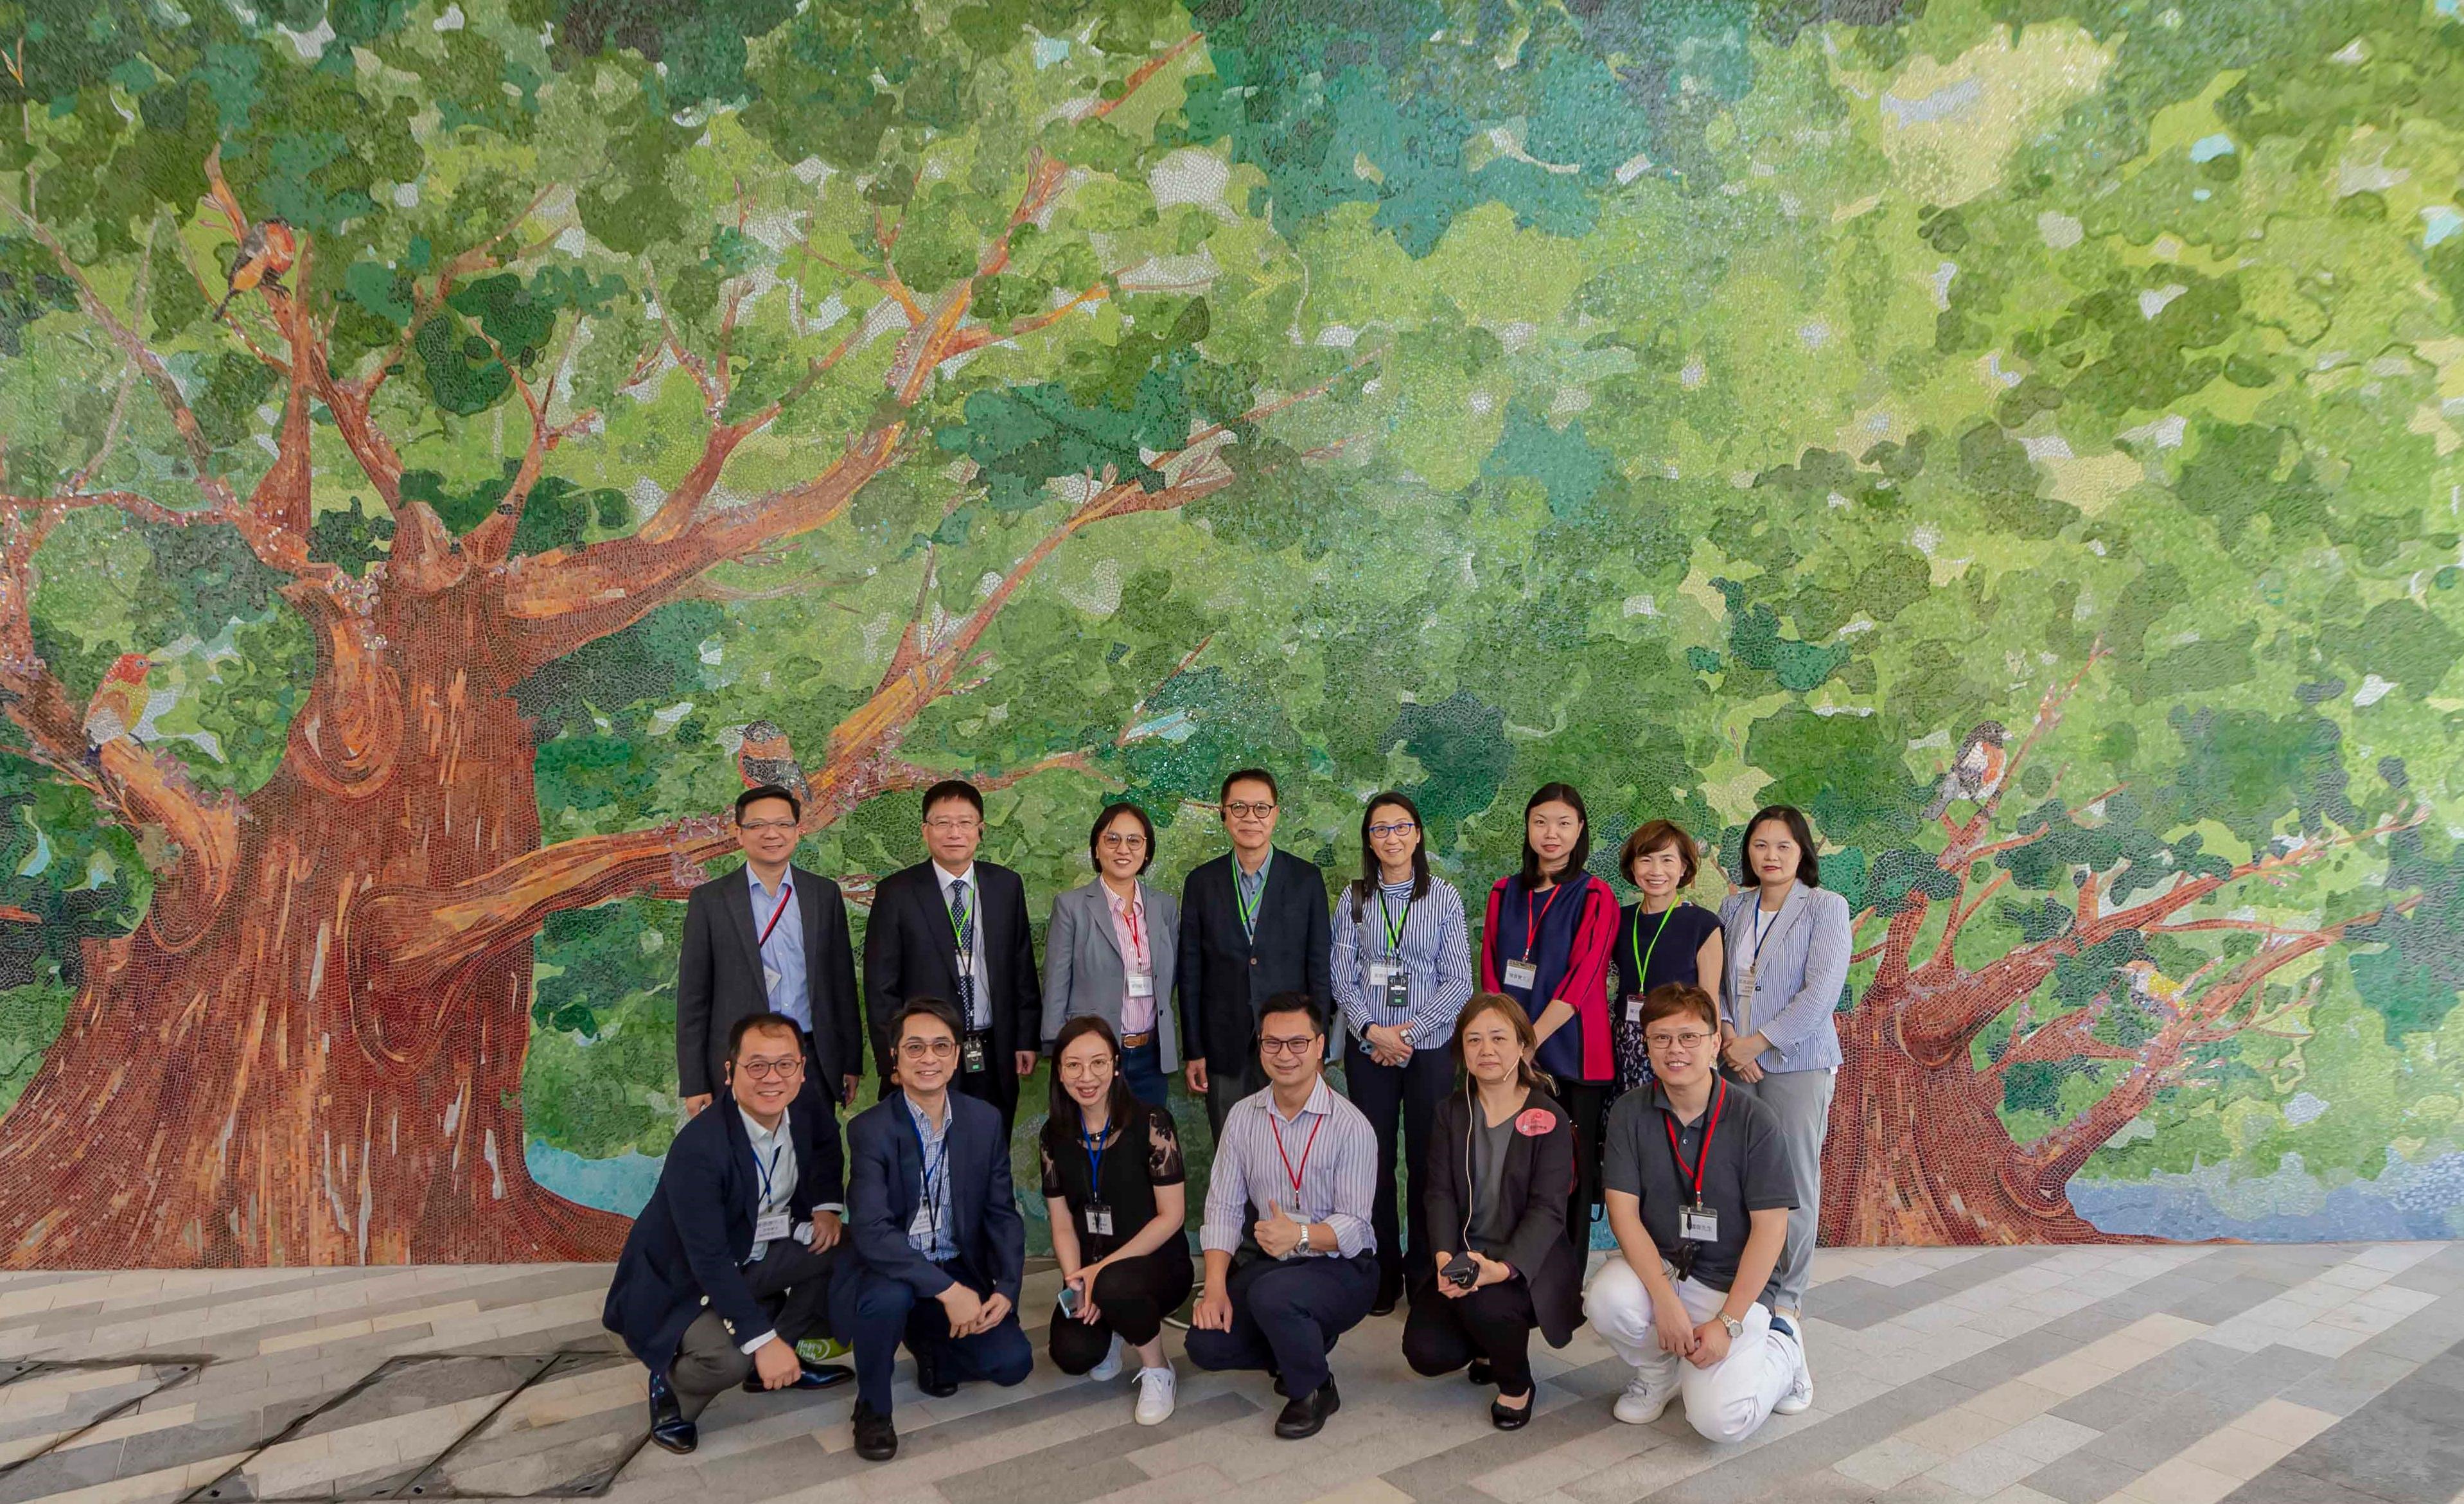 Members of the Hong Kong Housing Authority (HA) and its Commercial Properties Committee (CPC) today (June 20) visited the commercial facilities at the HA's Queens Hill Estate in Fanling. Photo shows the Chairman of the HA's CPC, Ms Serena Lau (back row, third left), members of the HA/CPC and officials of the Housing Department in front of a mural in the estate named "The Trees of Life". 